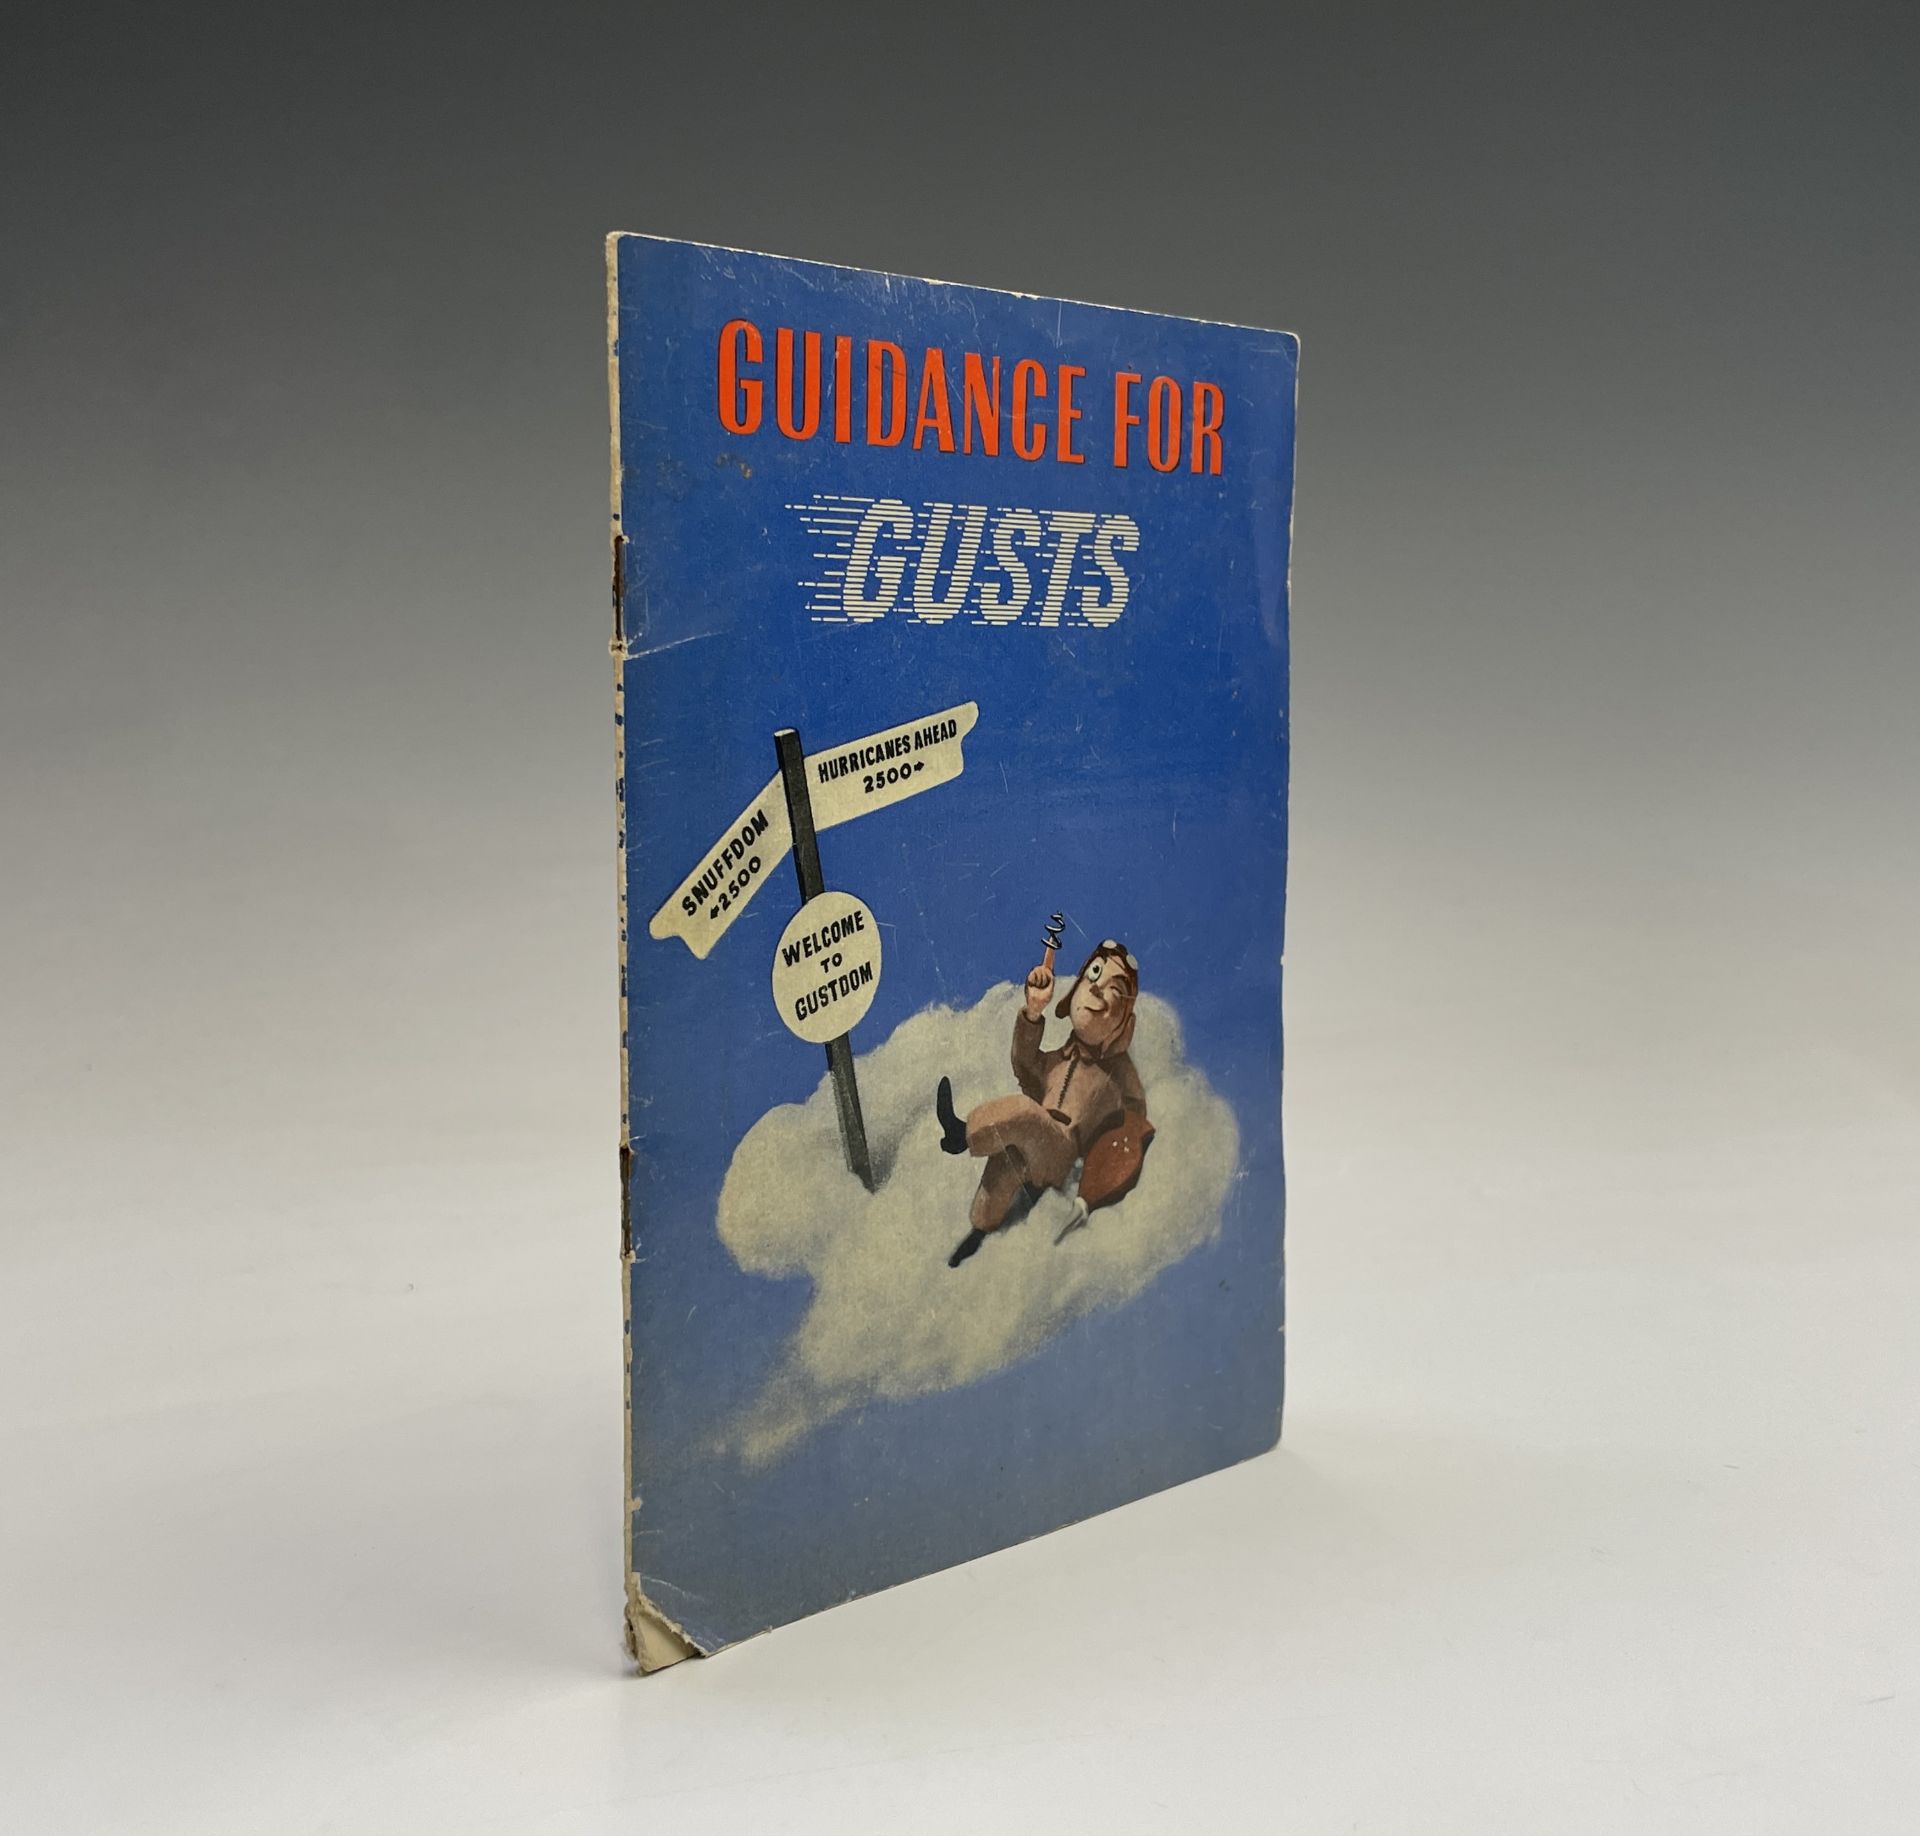 WORLD WAR II RAF PROPAGANDA. Guidance for Gusts. Being a few windy whimsies captured from the - Image 5 of 5